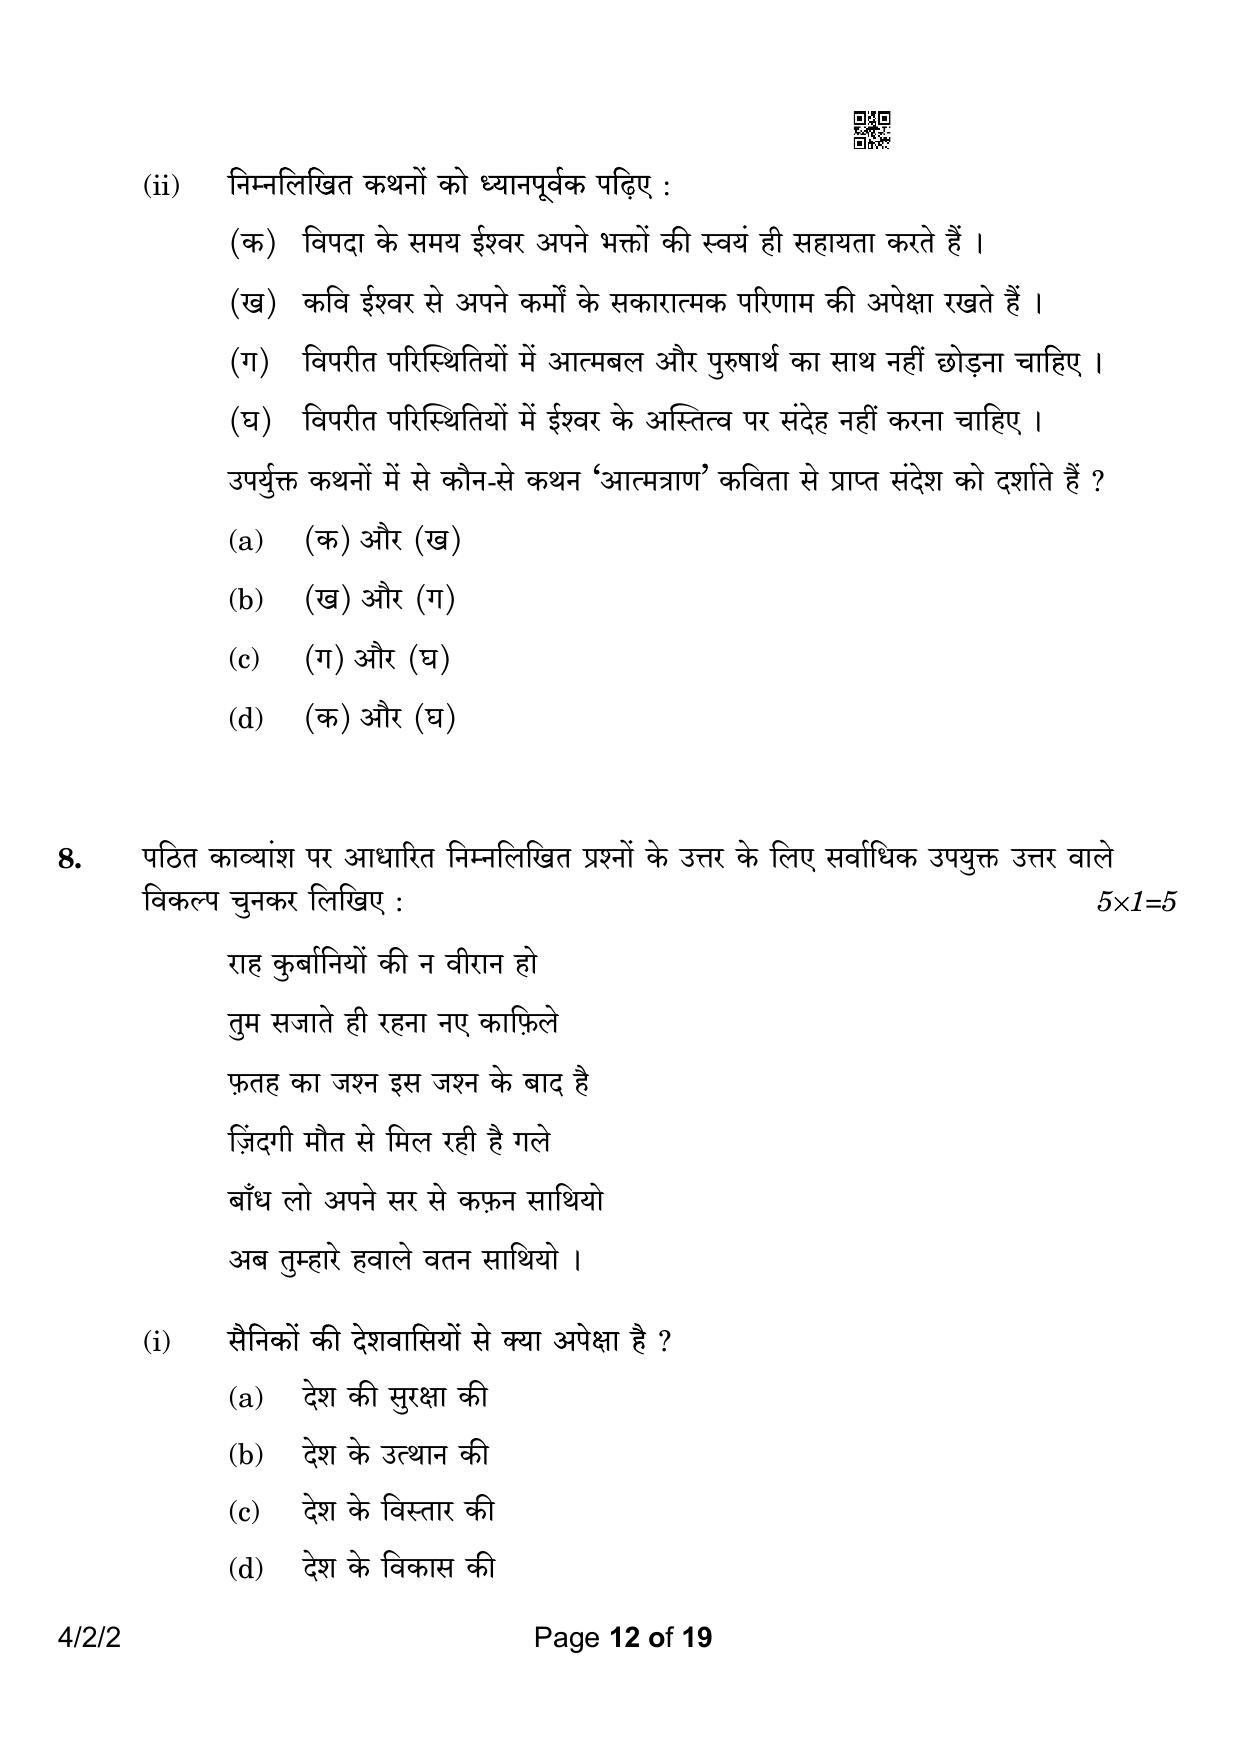 CBSE Class 10 4-2-2 Hindi B 2023 Question Paper - Page 12